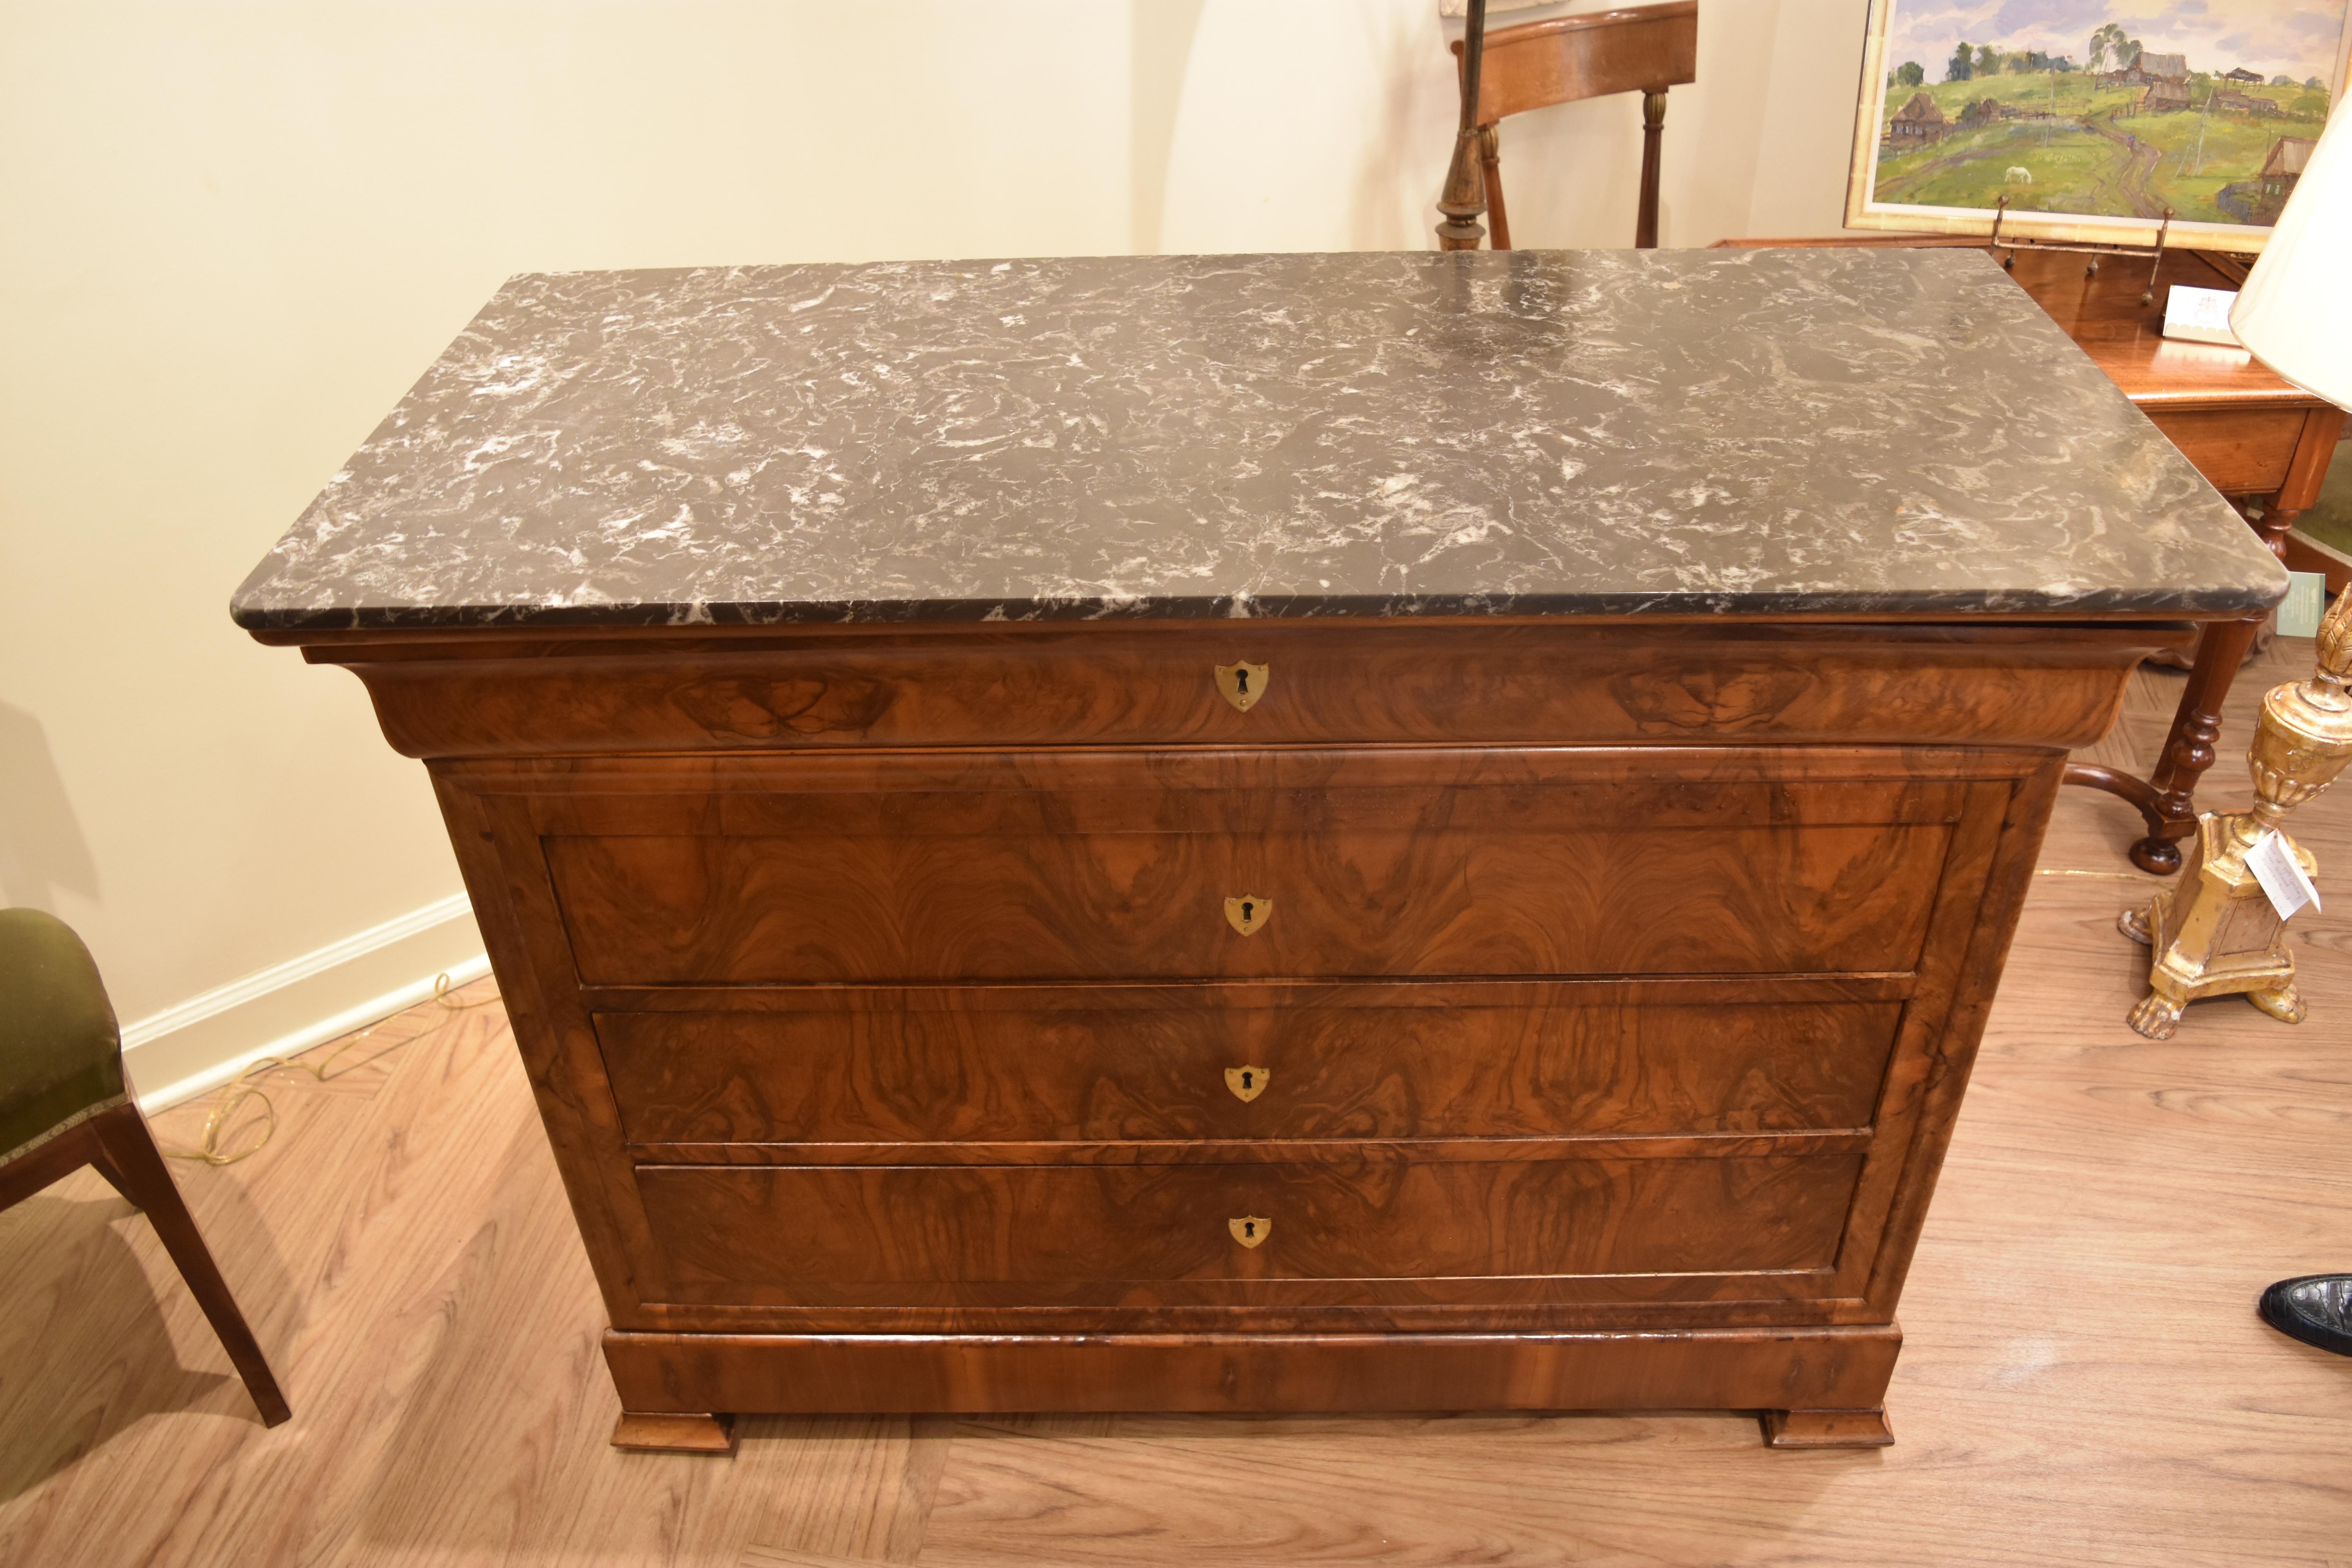 This 19th century Louis Philippe walnut commode features veneered book matched figured walnut on the facade with four working dovetailed drawers when using the key included. The top is a charcoal gray marble with white veining. Overall, this piece